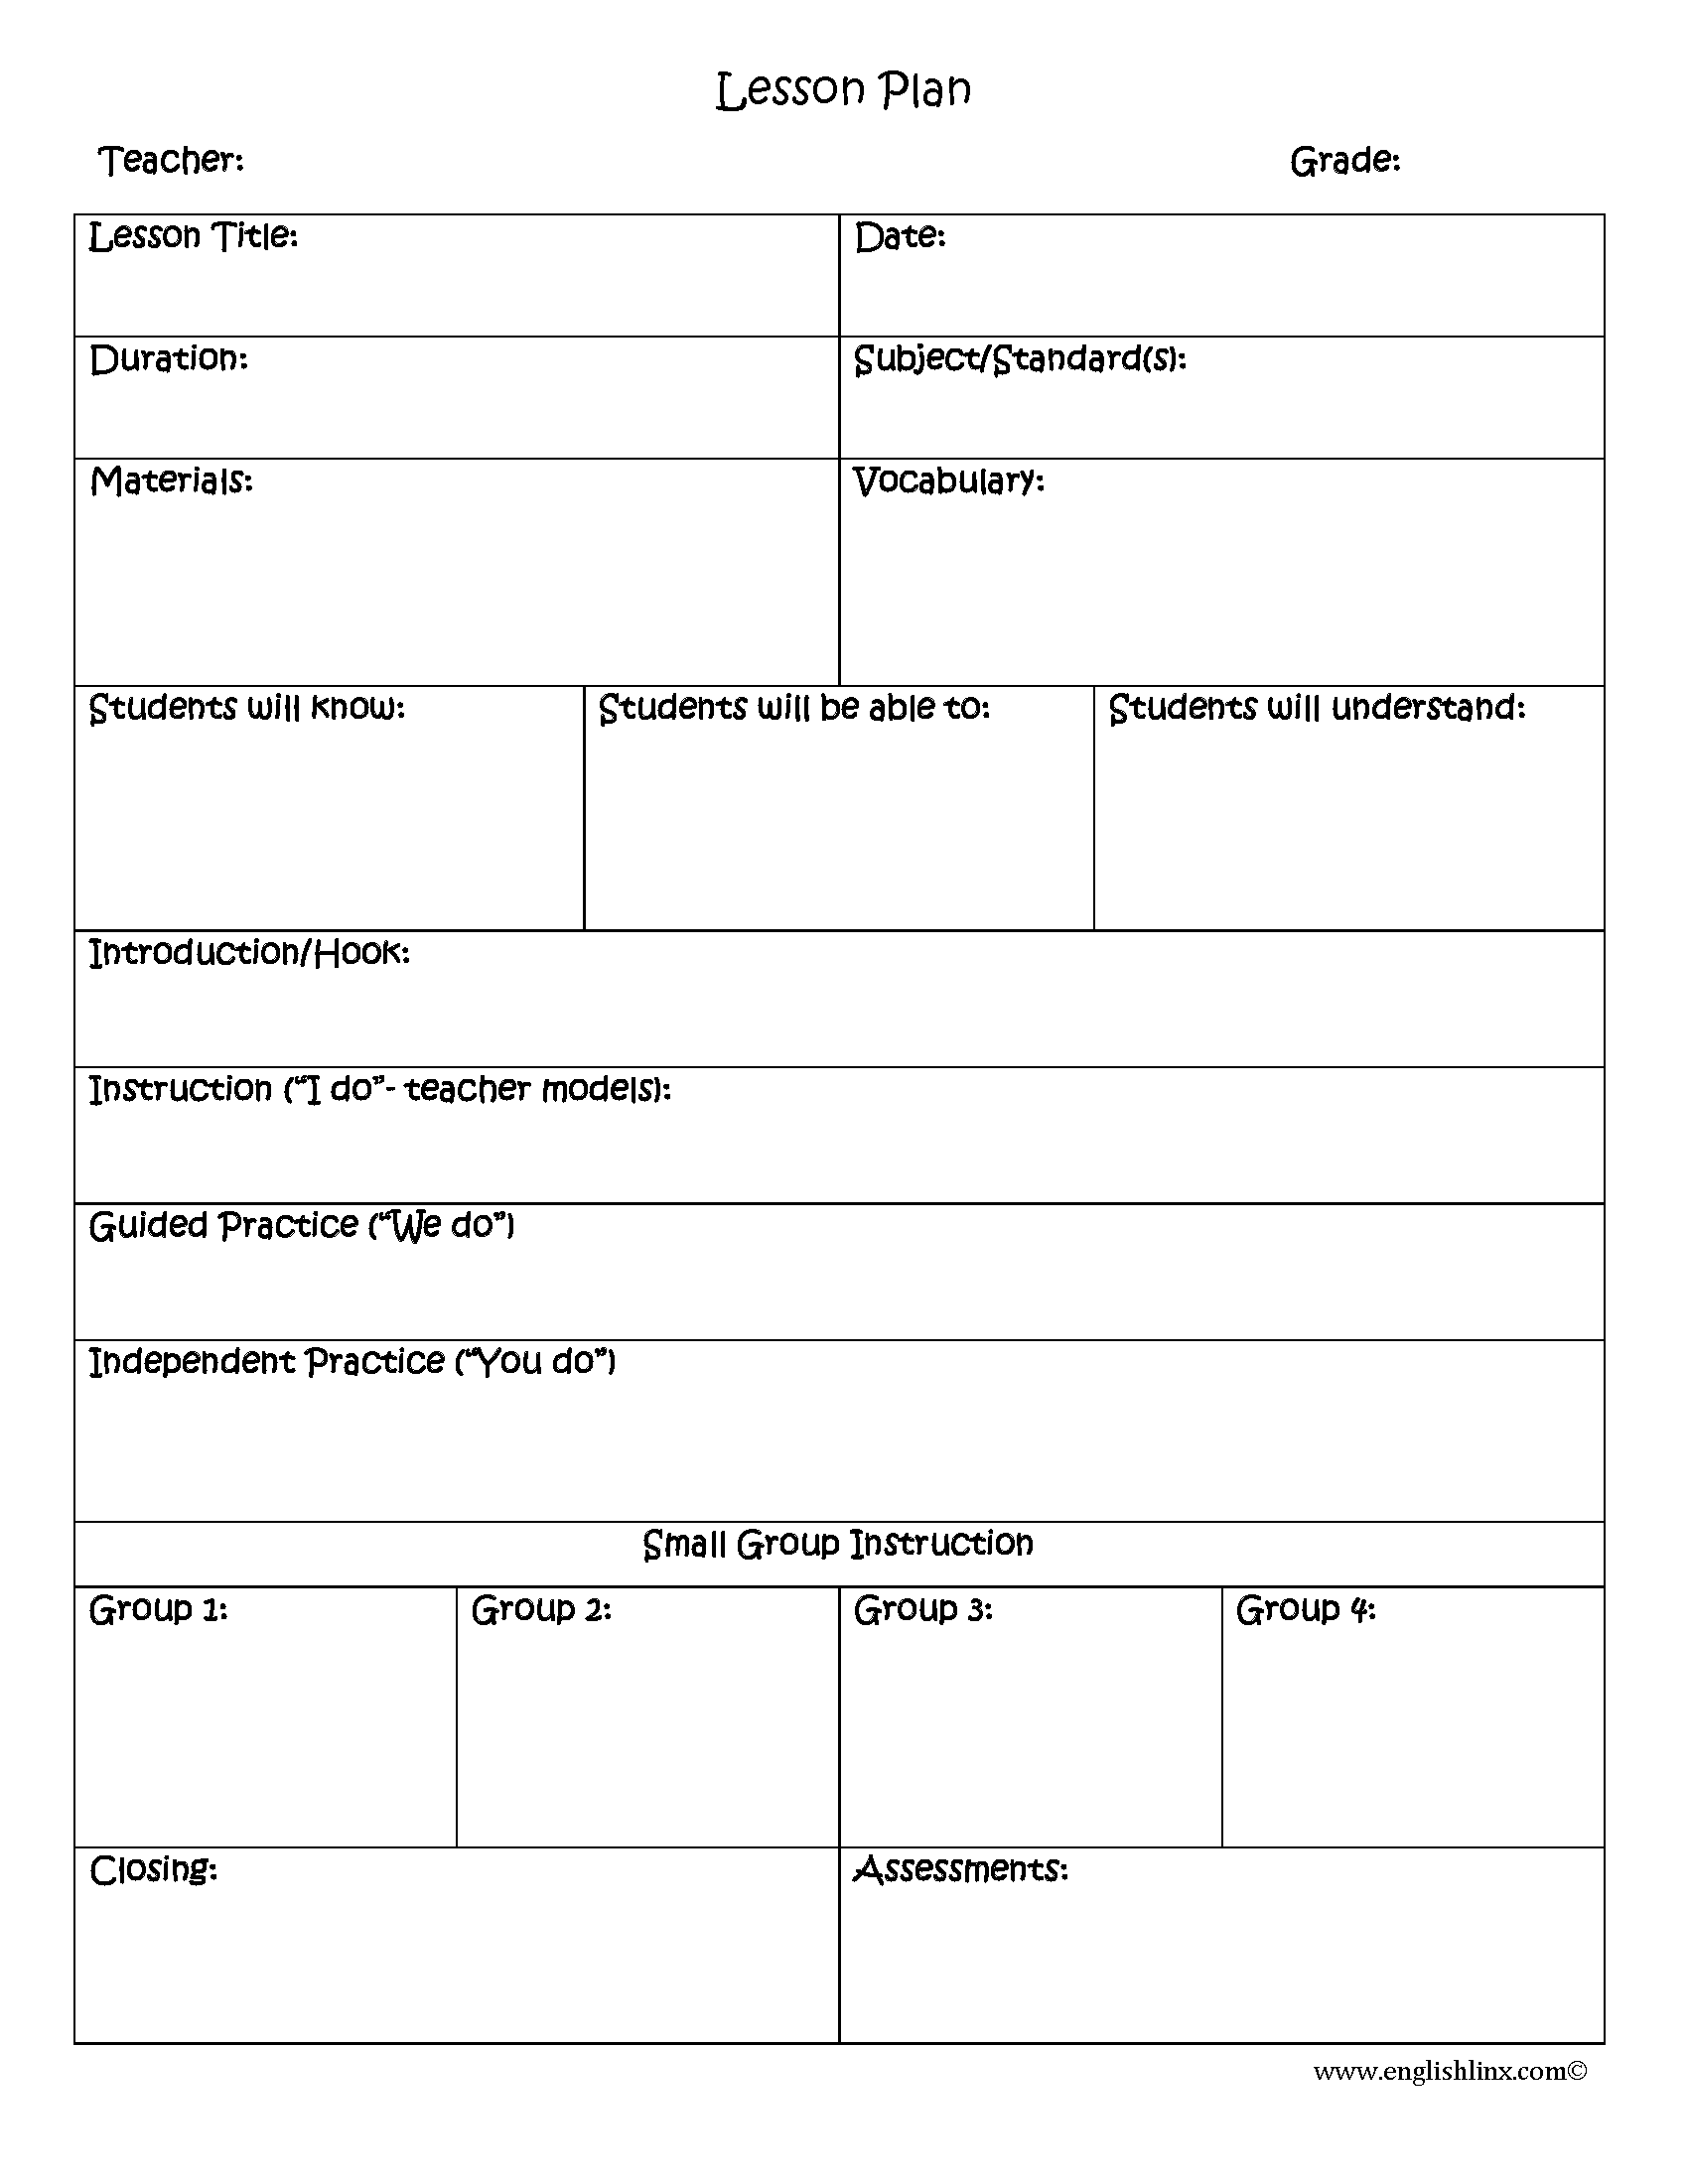 small group template